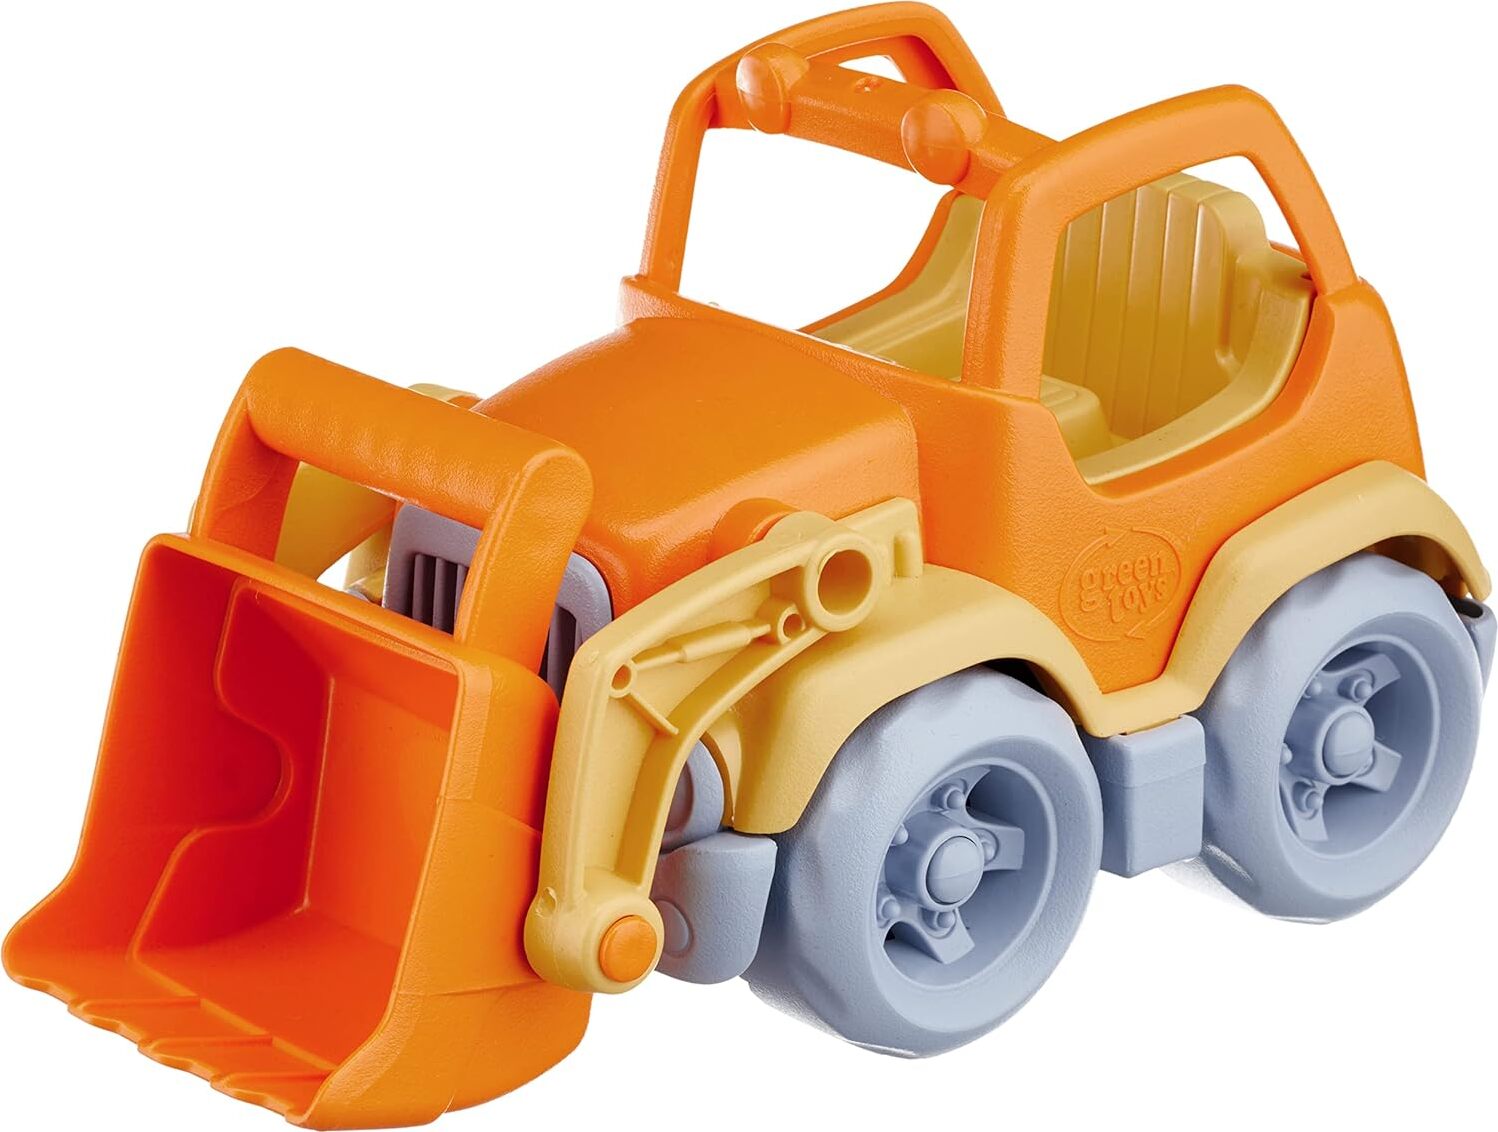 Construction Truck 3-Pack